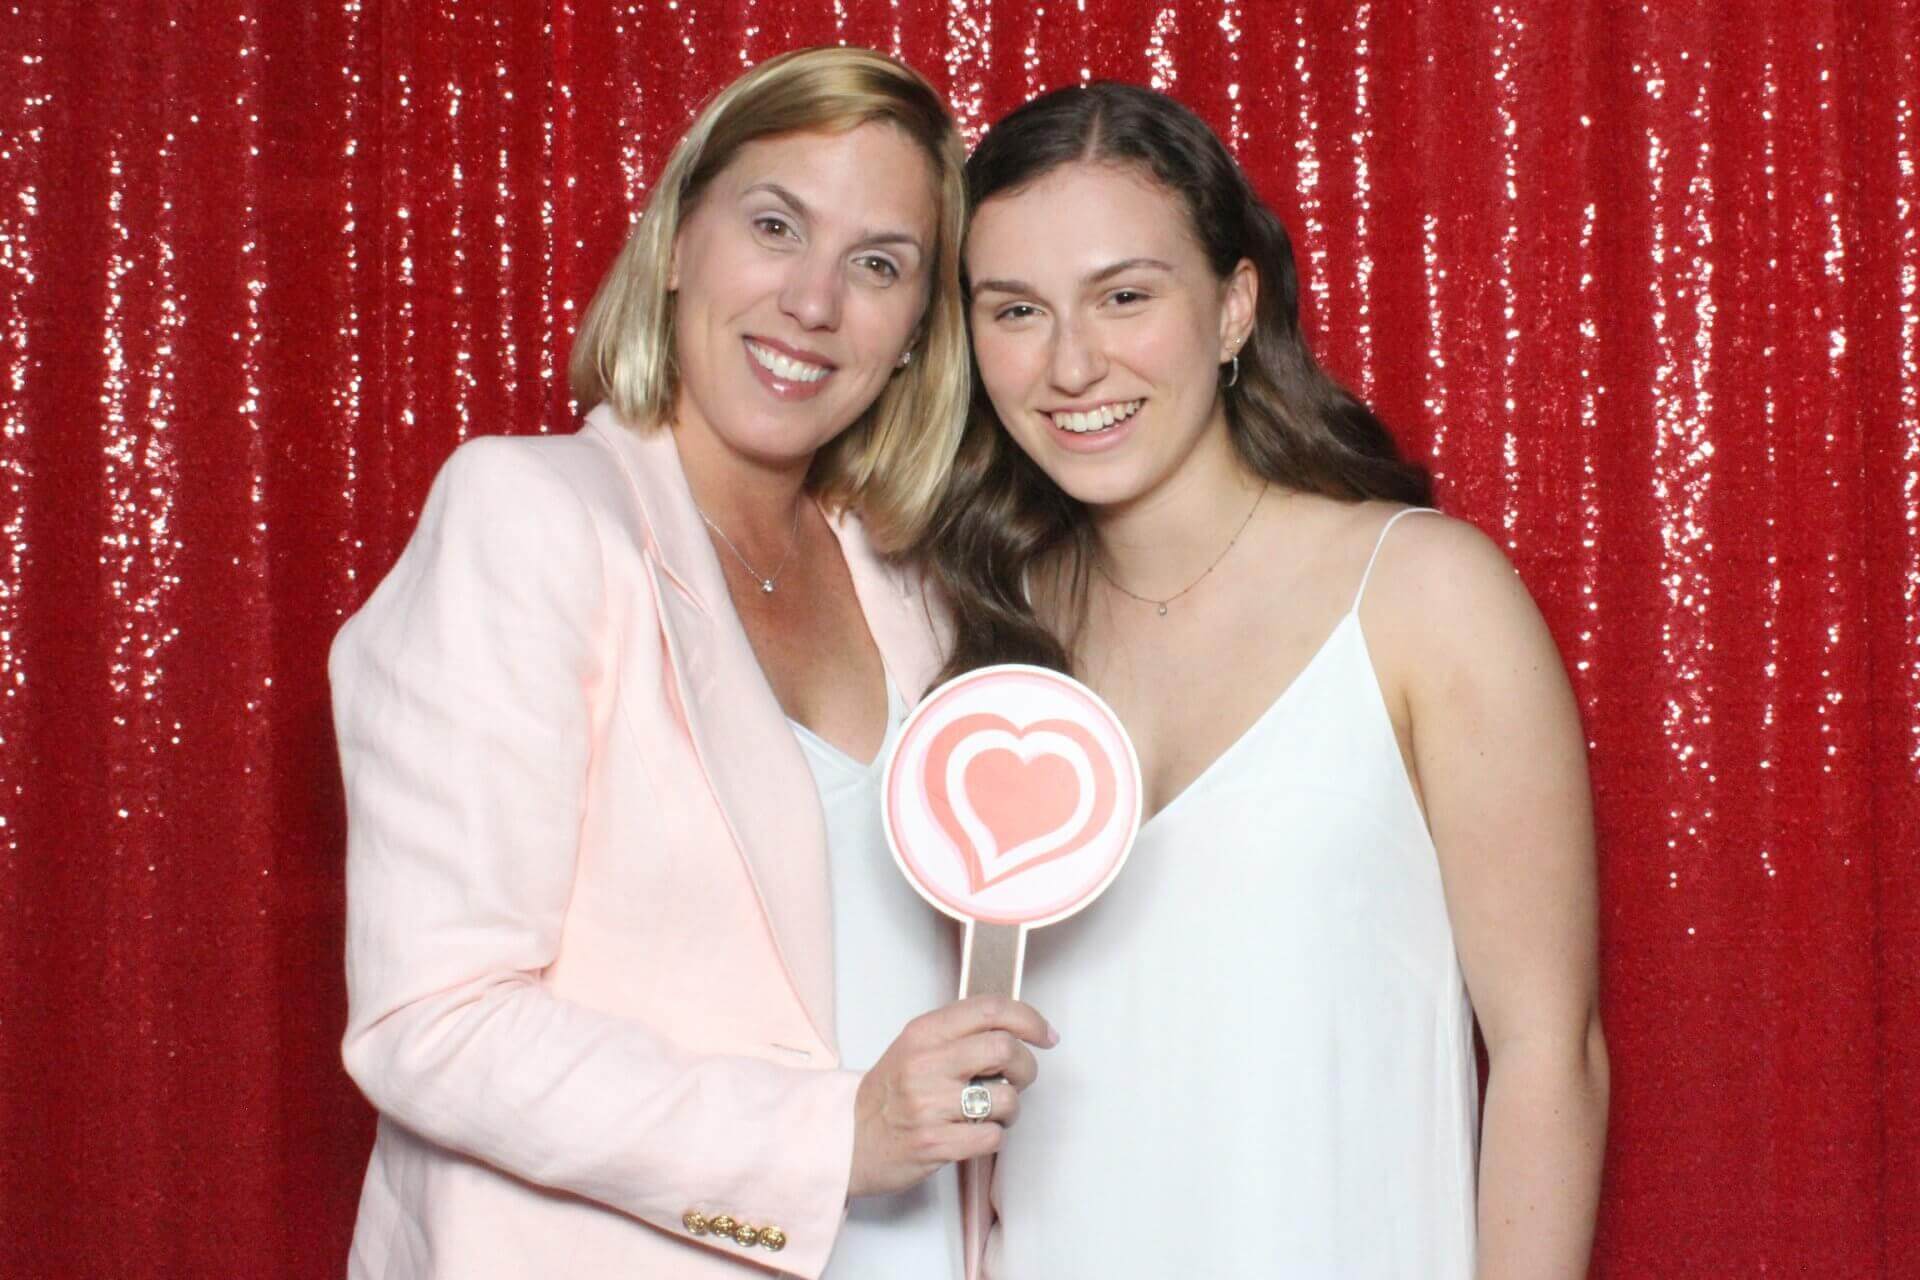 Photo booth rental in Toronto for an event. Posing in front of a red sequin backdrop offered by LOL Photo Booth. Tags: Event planning ideas, Photo booth prints, high resolution photos, Toronto photo booth rental services. GIFS, Boomerangs, Mosaic Walls, Slow motion, brand activation.